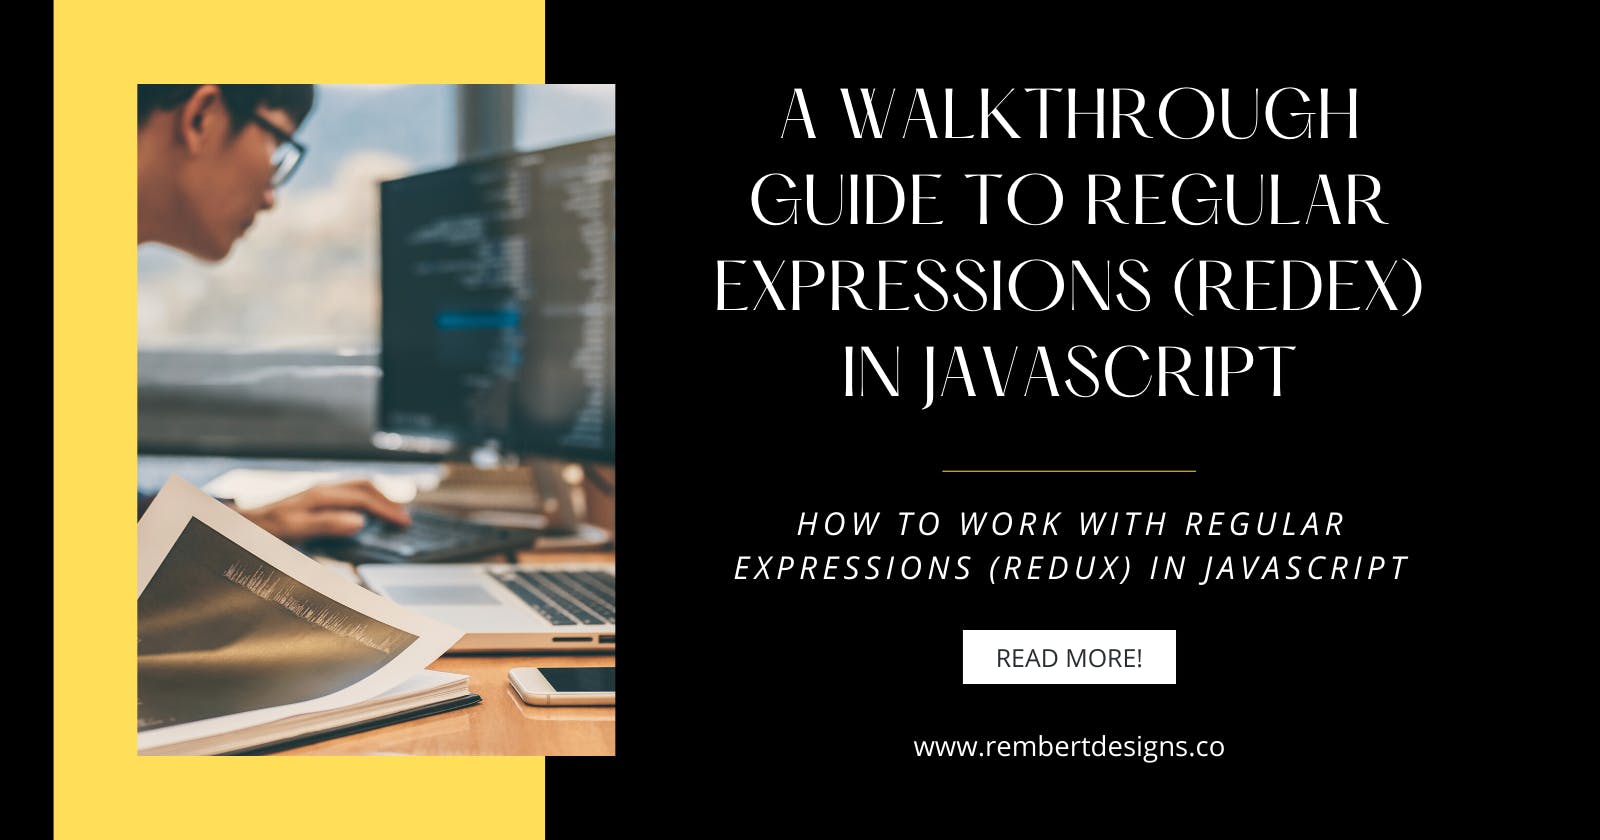 A Walkthrough Guide to Regular Expressions (RegEx) in JavaScript